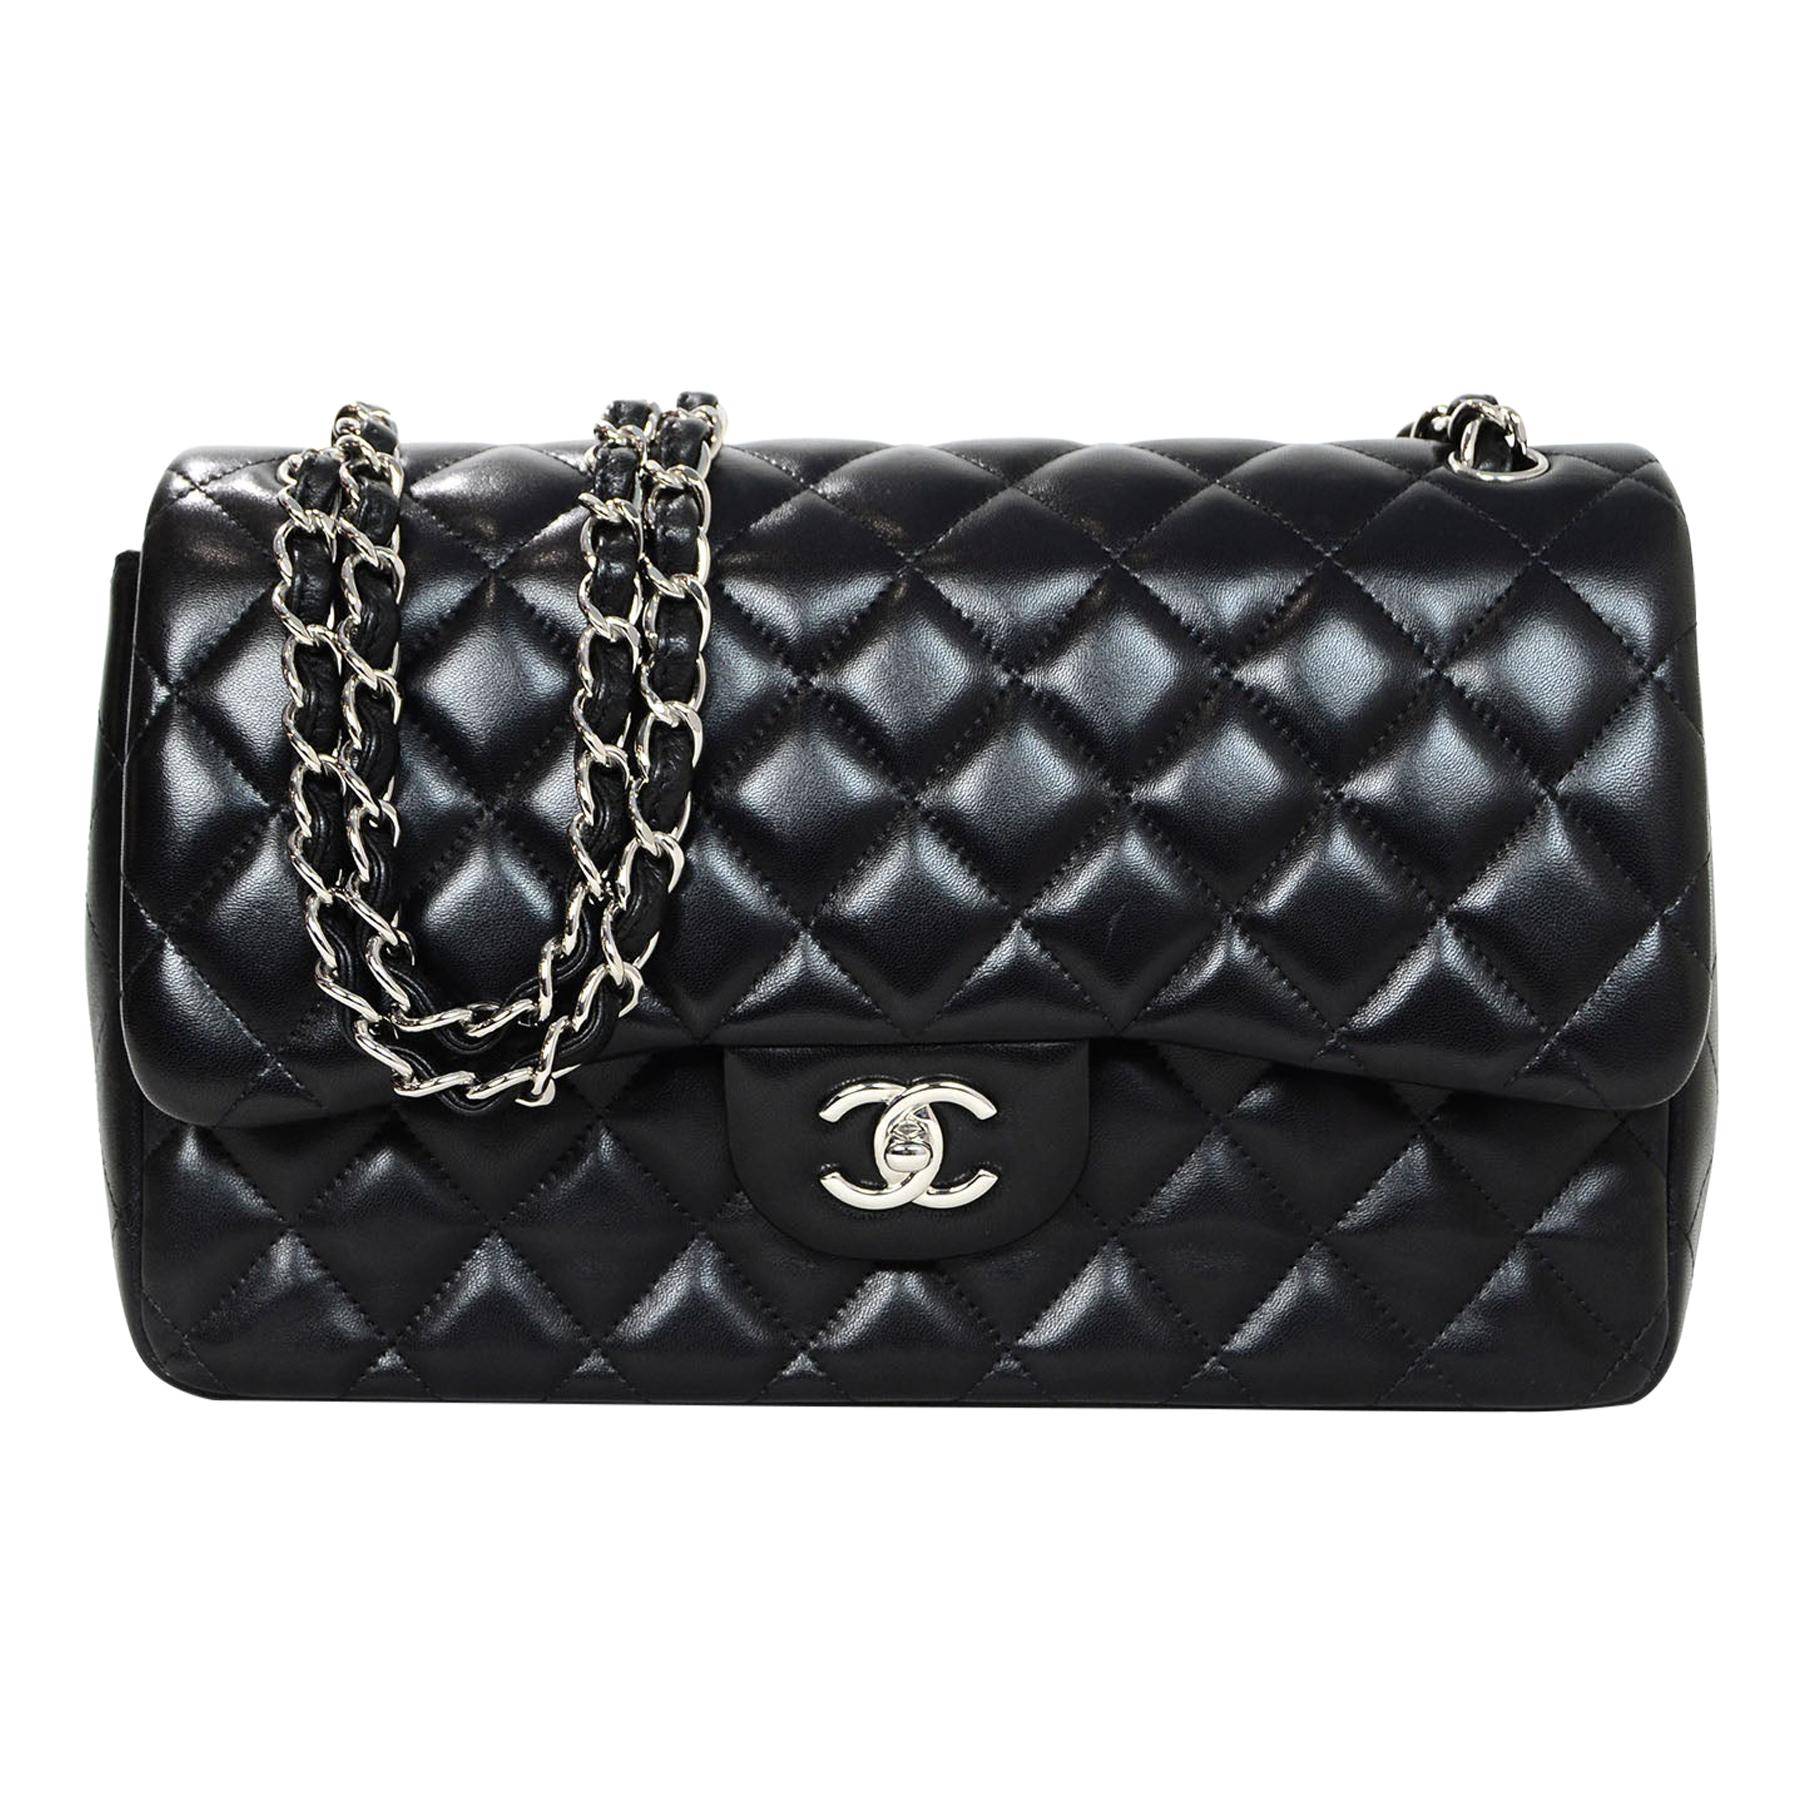 Chanel Black Lambskin Leather Quilted Double Flap Classic Jumbo Bag SHW